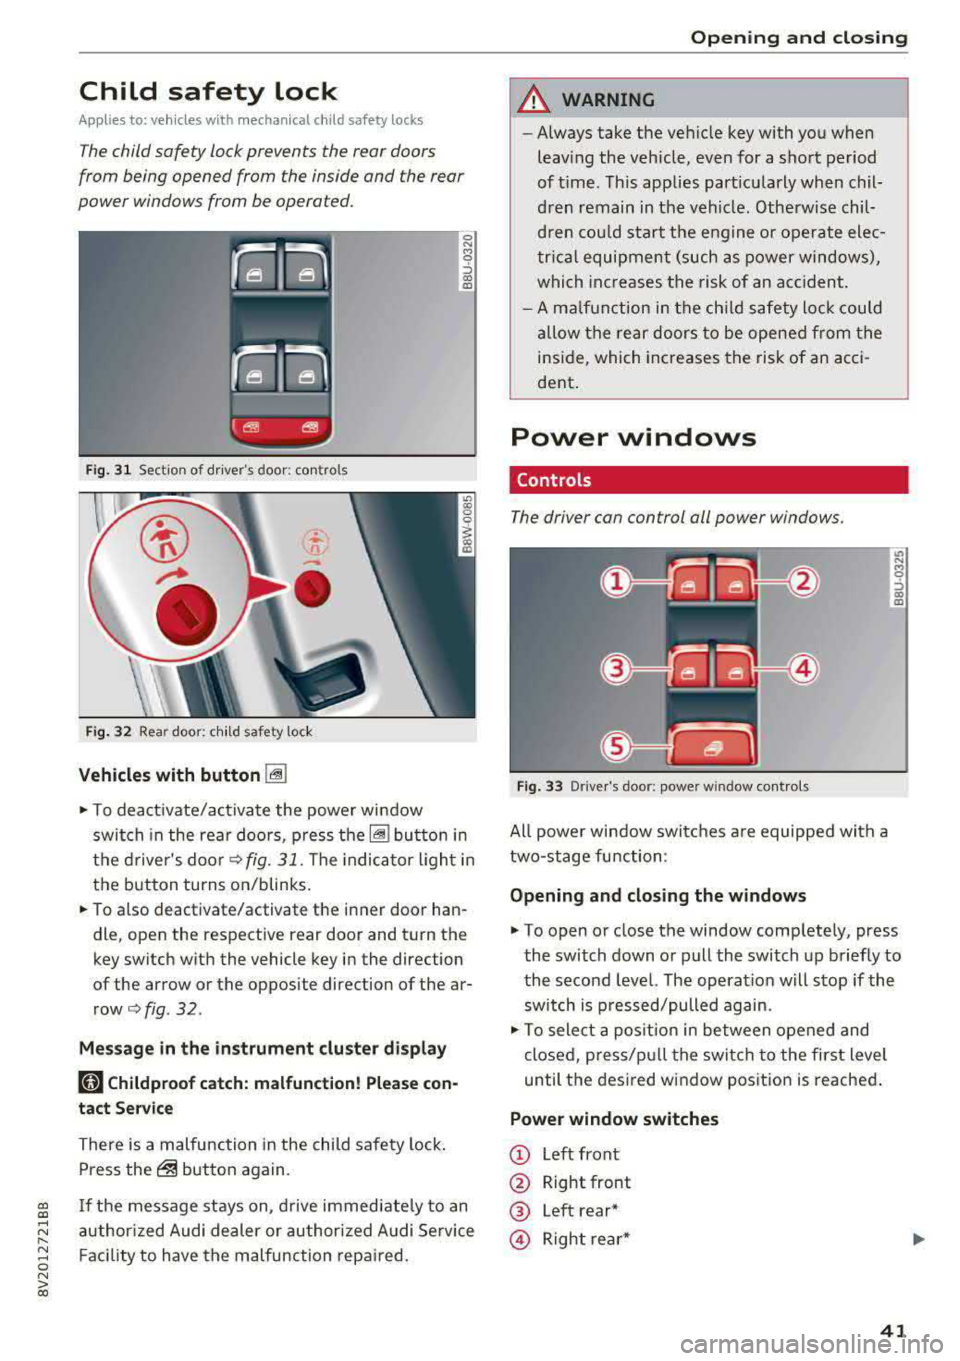 AUDI A3 SEDAN 2017  Owners Manual Child  safety  lock 
App lies  to: ve hicles  wit h m echan ica l ch ild sa fety locks 
The child  safety  lock prevents  the  rear  doors 
from  being  opened  from  the  inside  and  the  rear 
powe